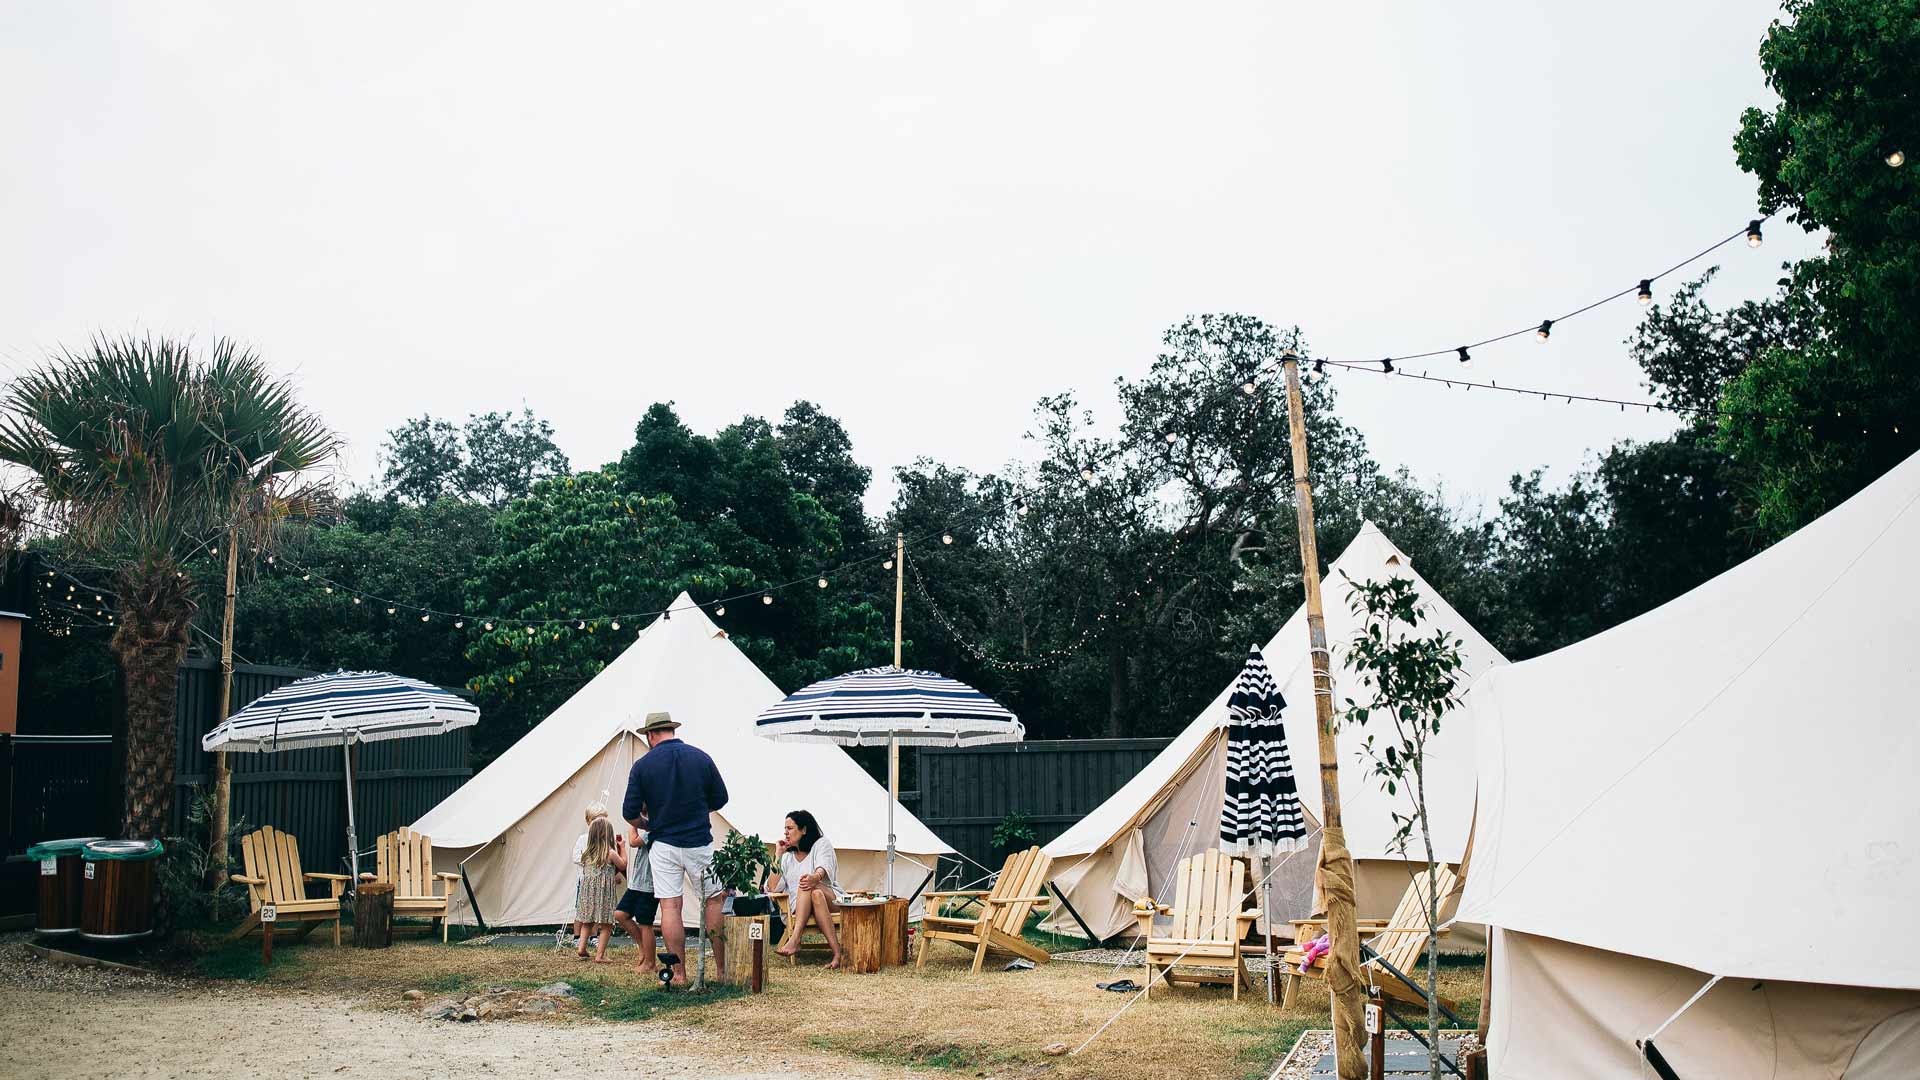 The Hideaway Is Cabarita Beach's New Waterfront Glamping Retreat